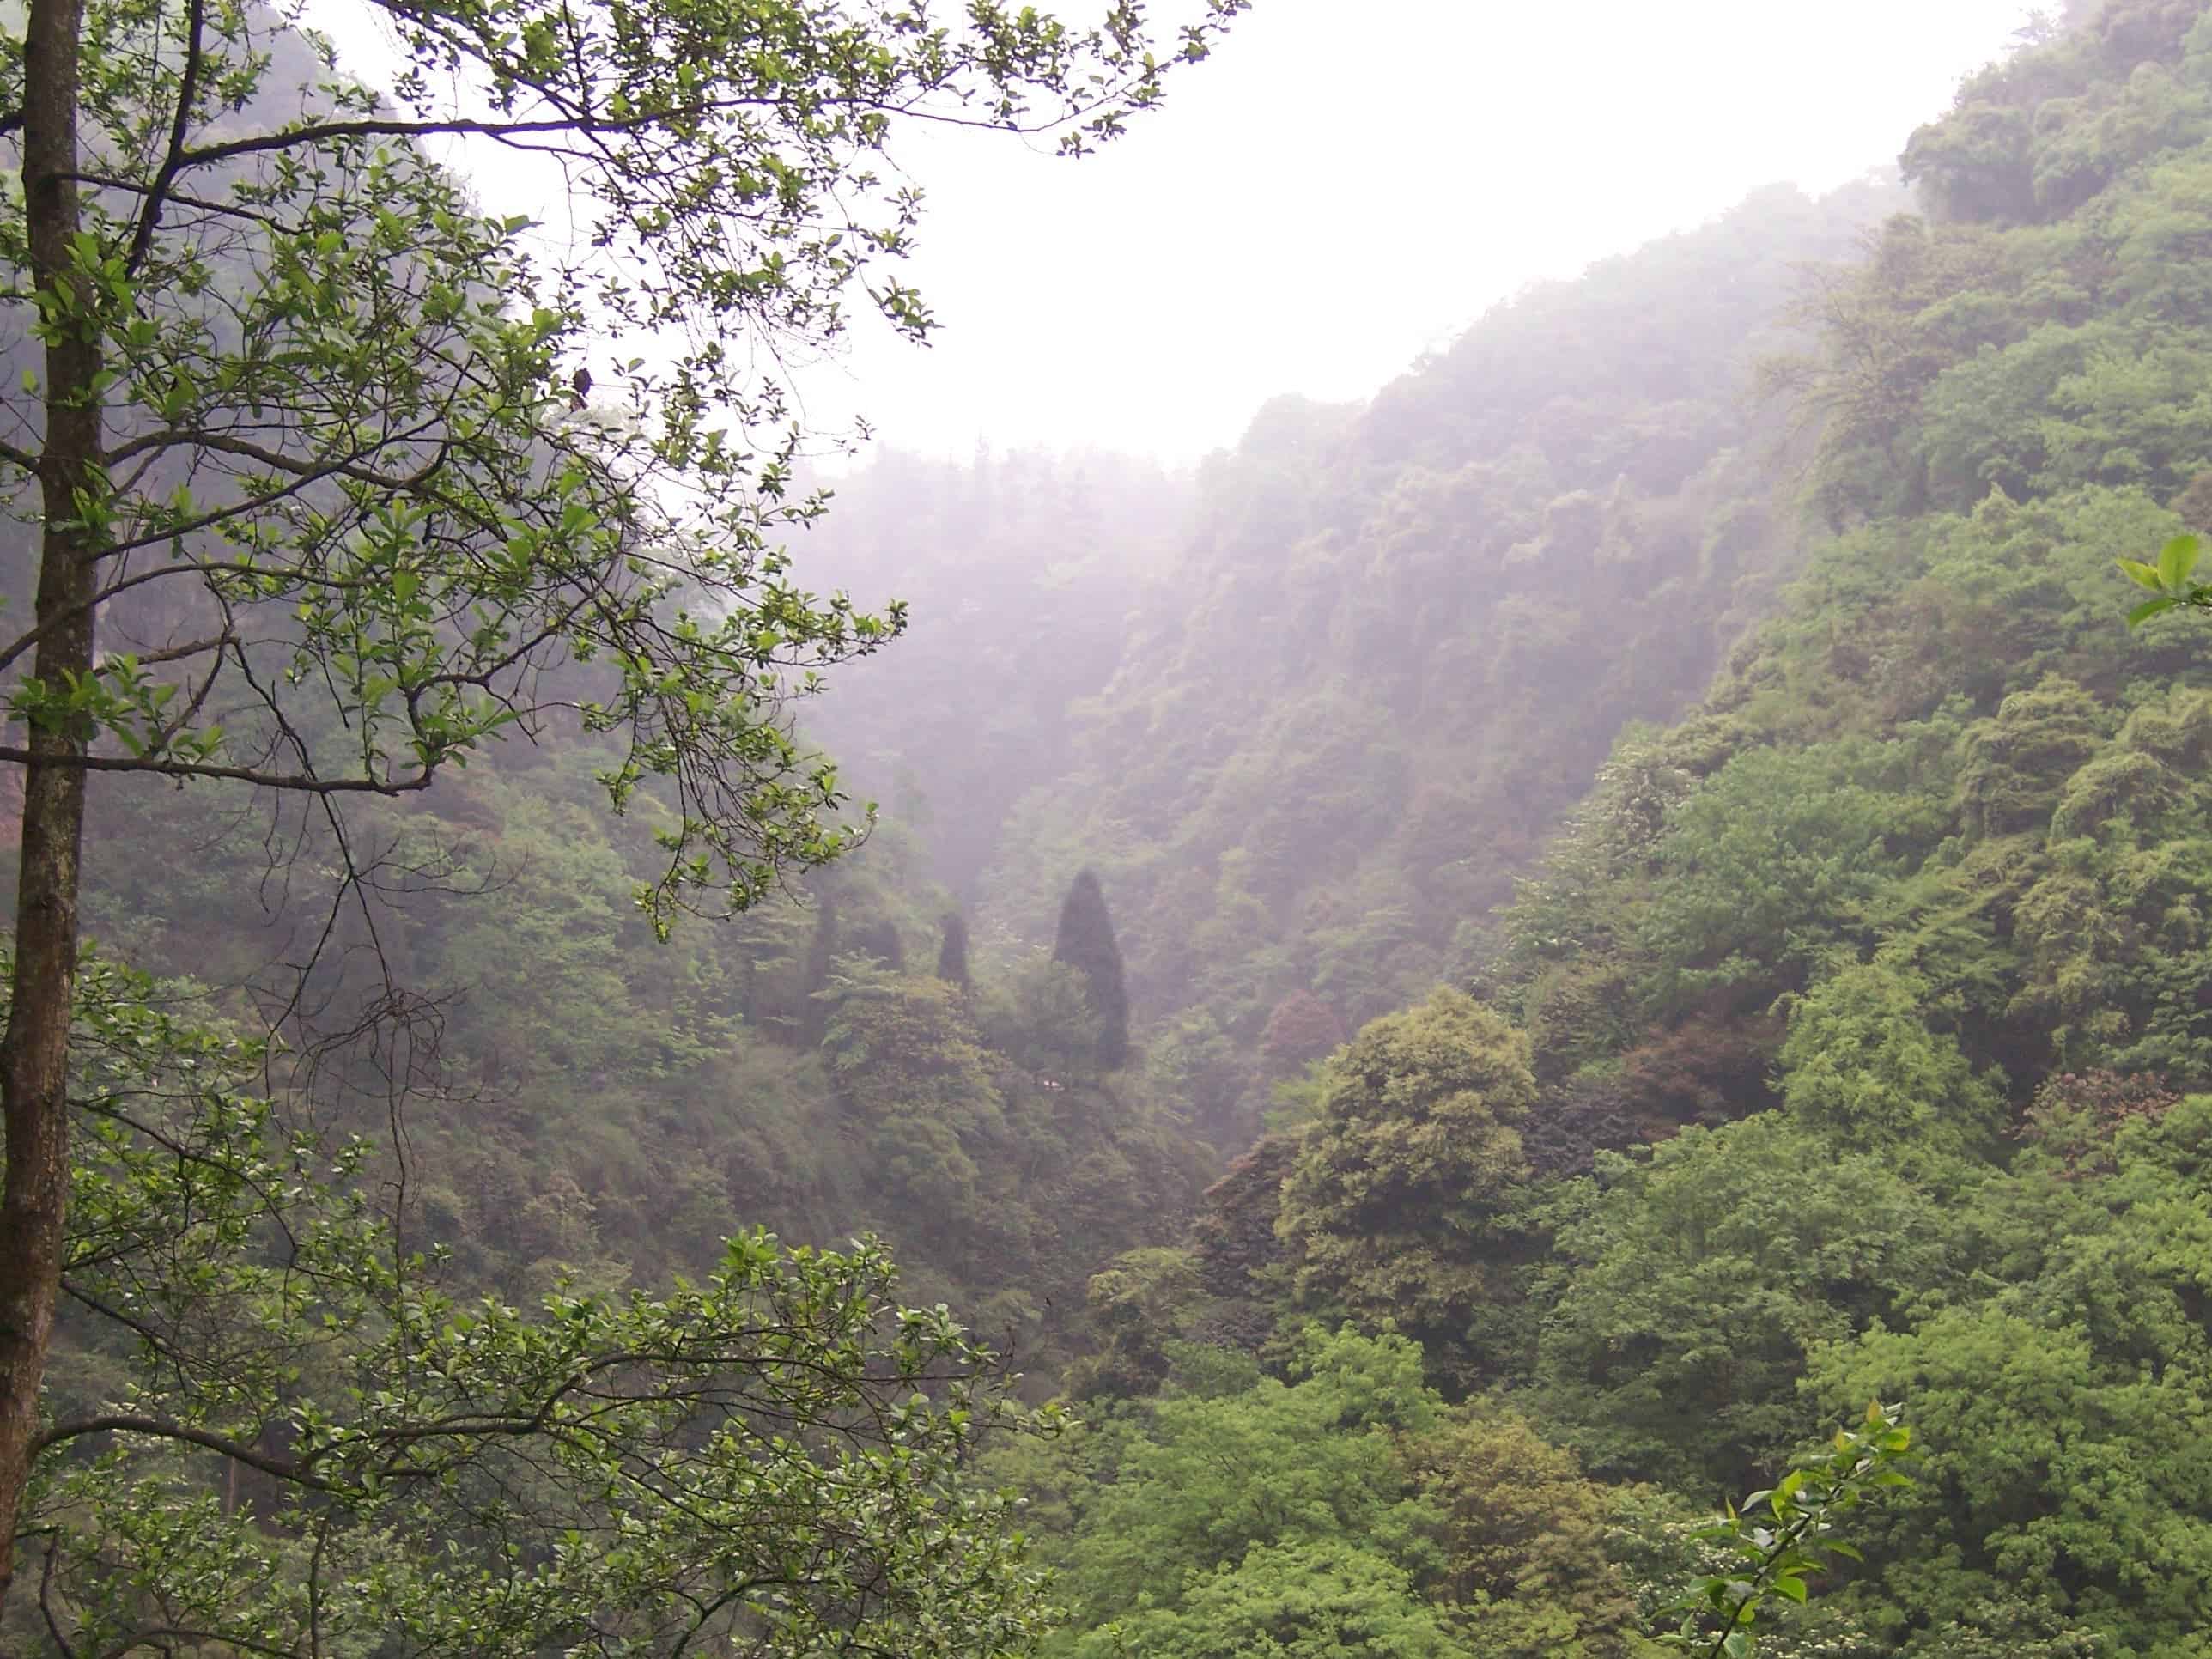 A diverse forest in China. Image credits: McKay Savage.